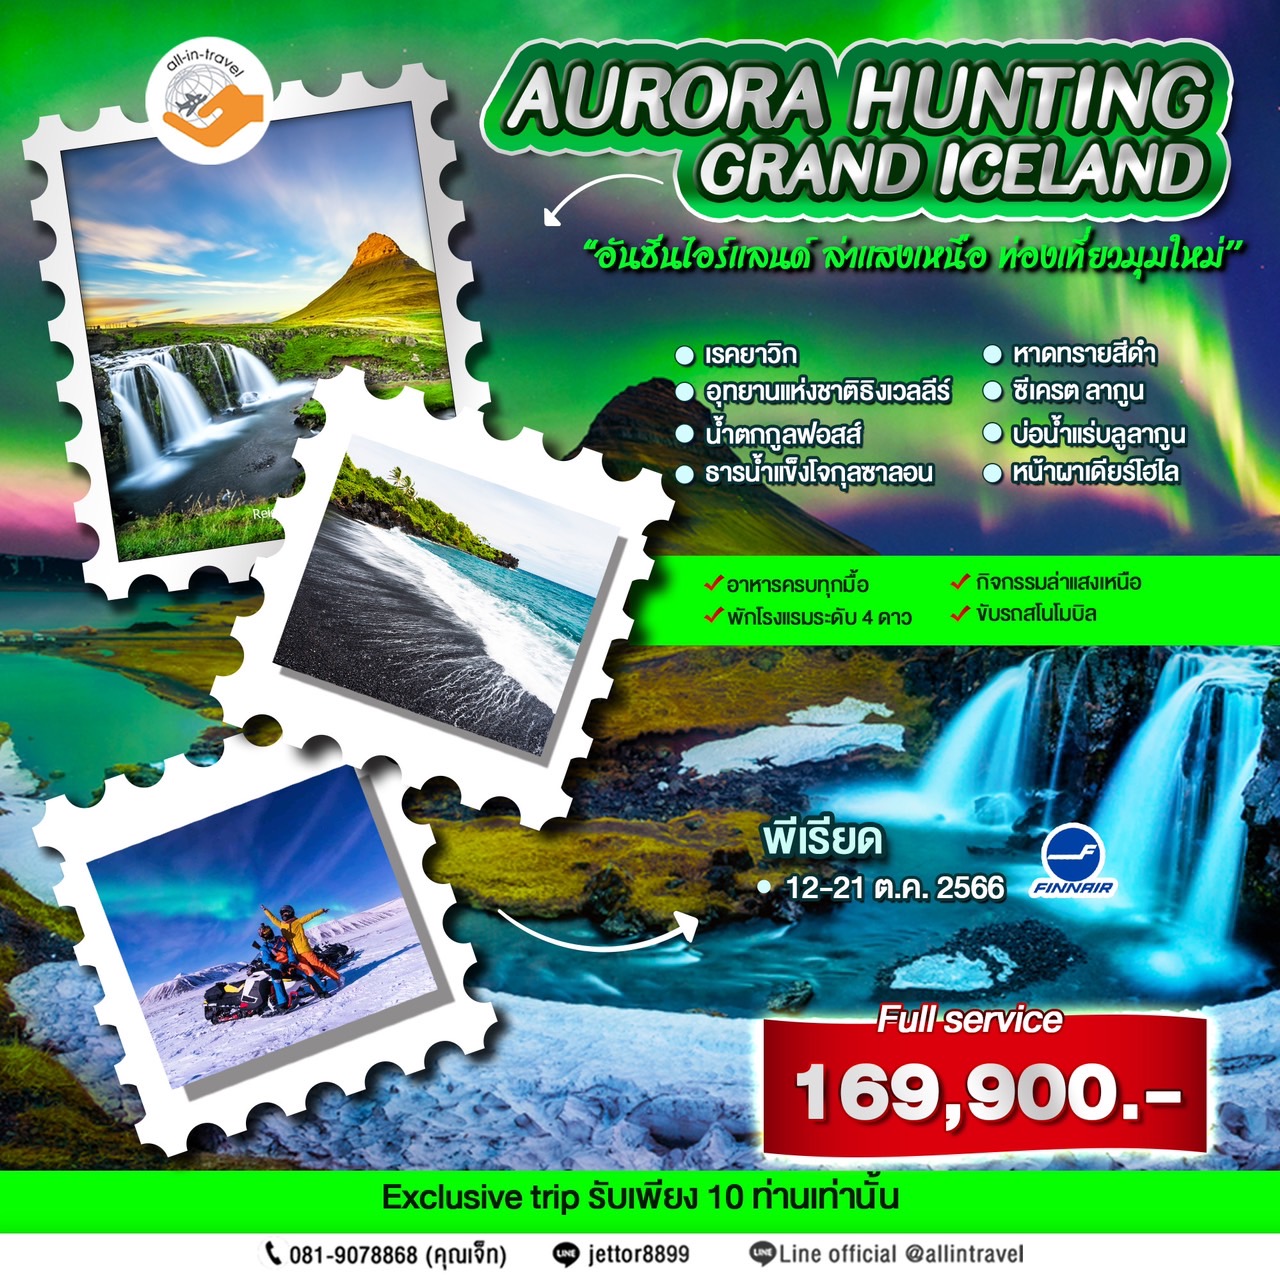 EXCLUSIVE AURORA HUNTING  GRAND ICELAND 